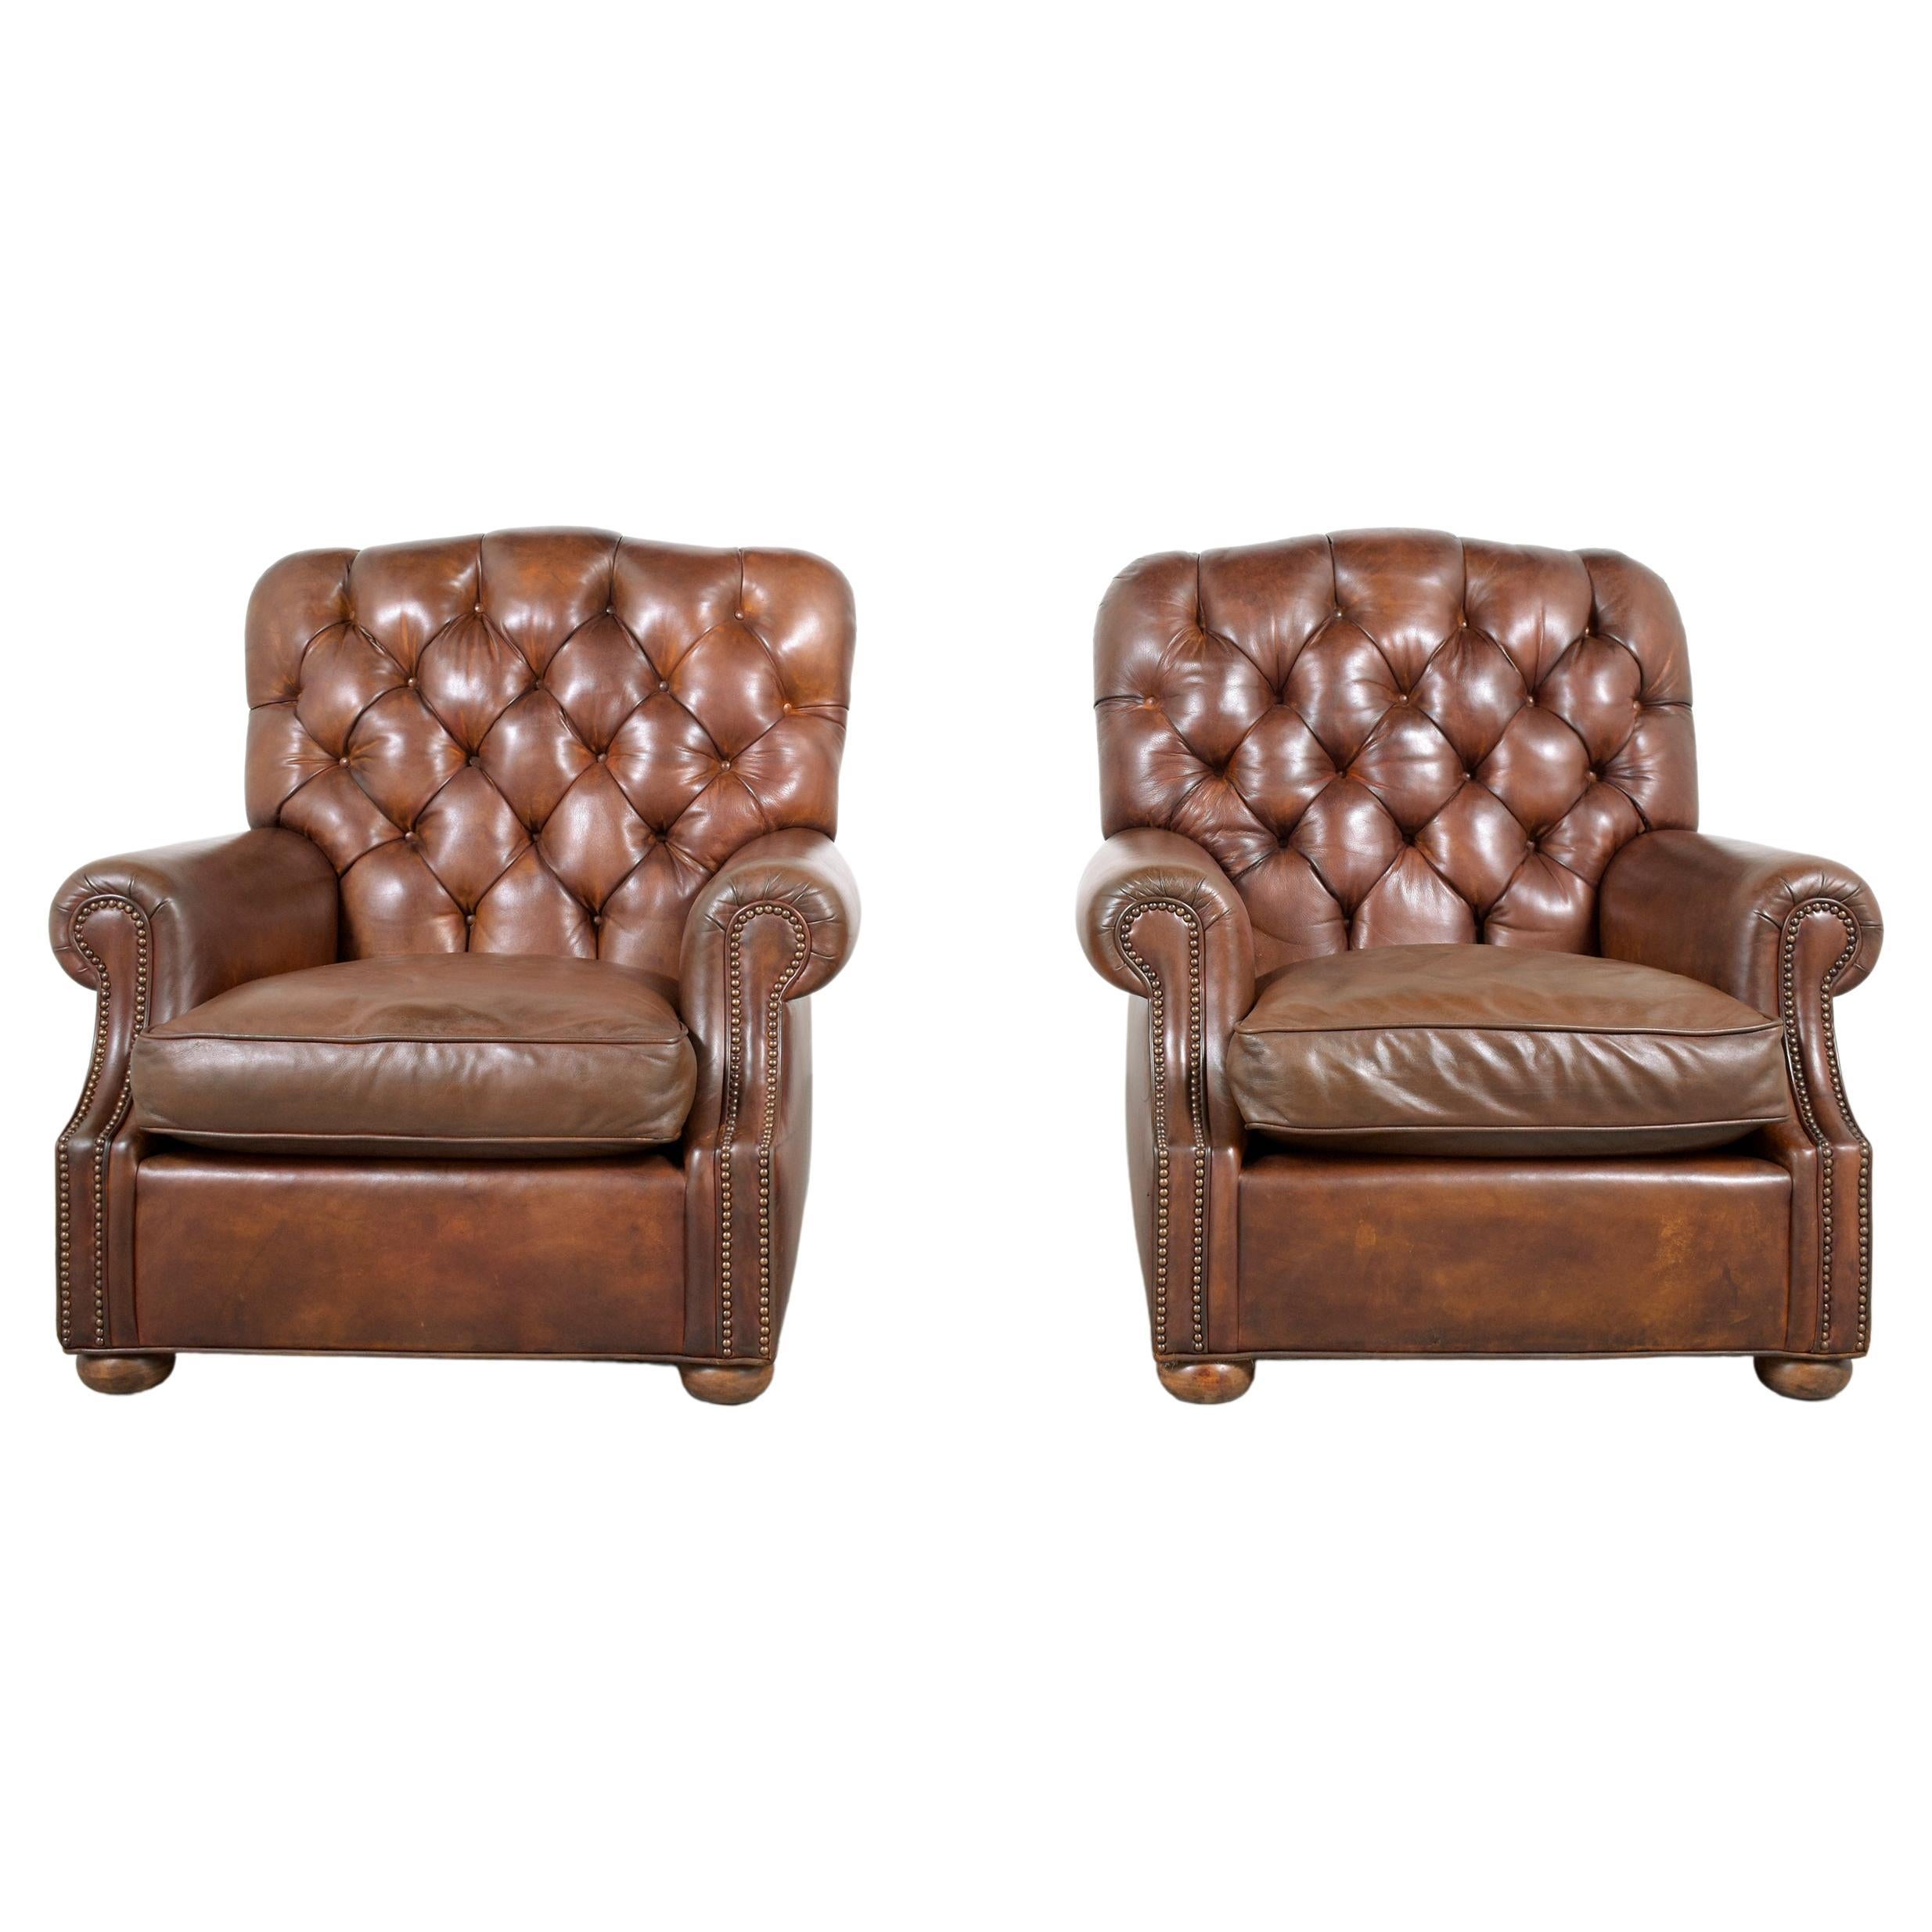 An extraordinary Pair of Leather Chesterfield Chairs in great condition executed out of leather and feature leather upholstery with a tufted design, brass nailhead trim details comfortable removable seat cushions. These chairs are dyed in brown